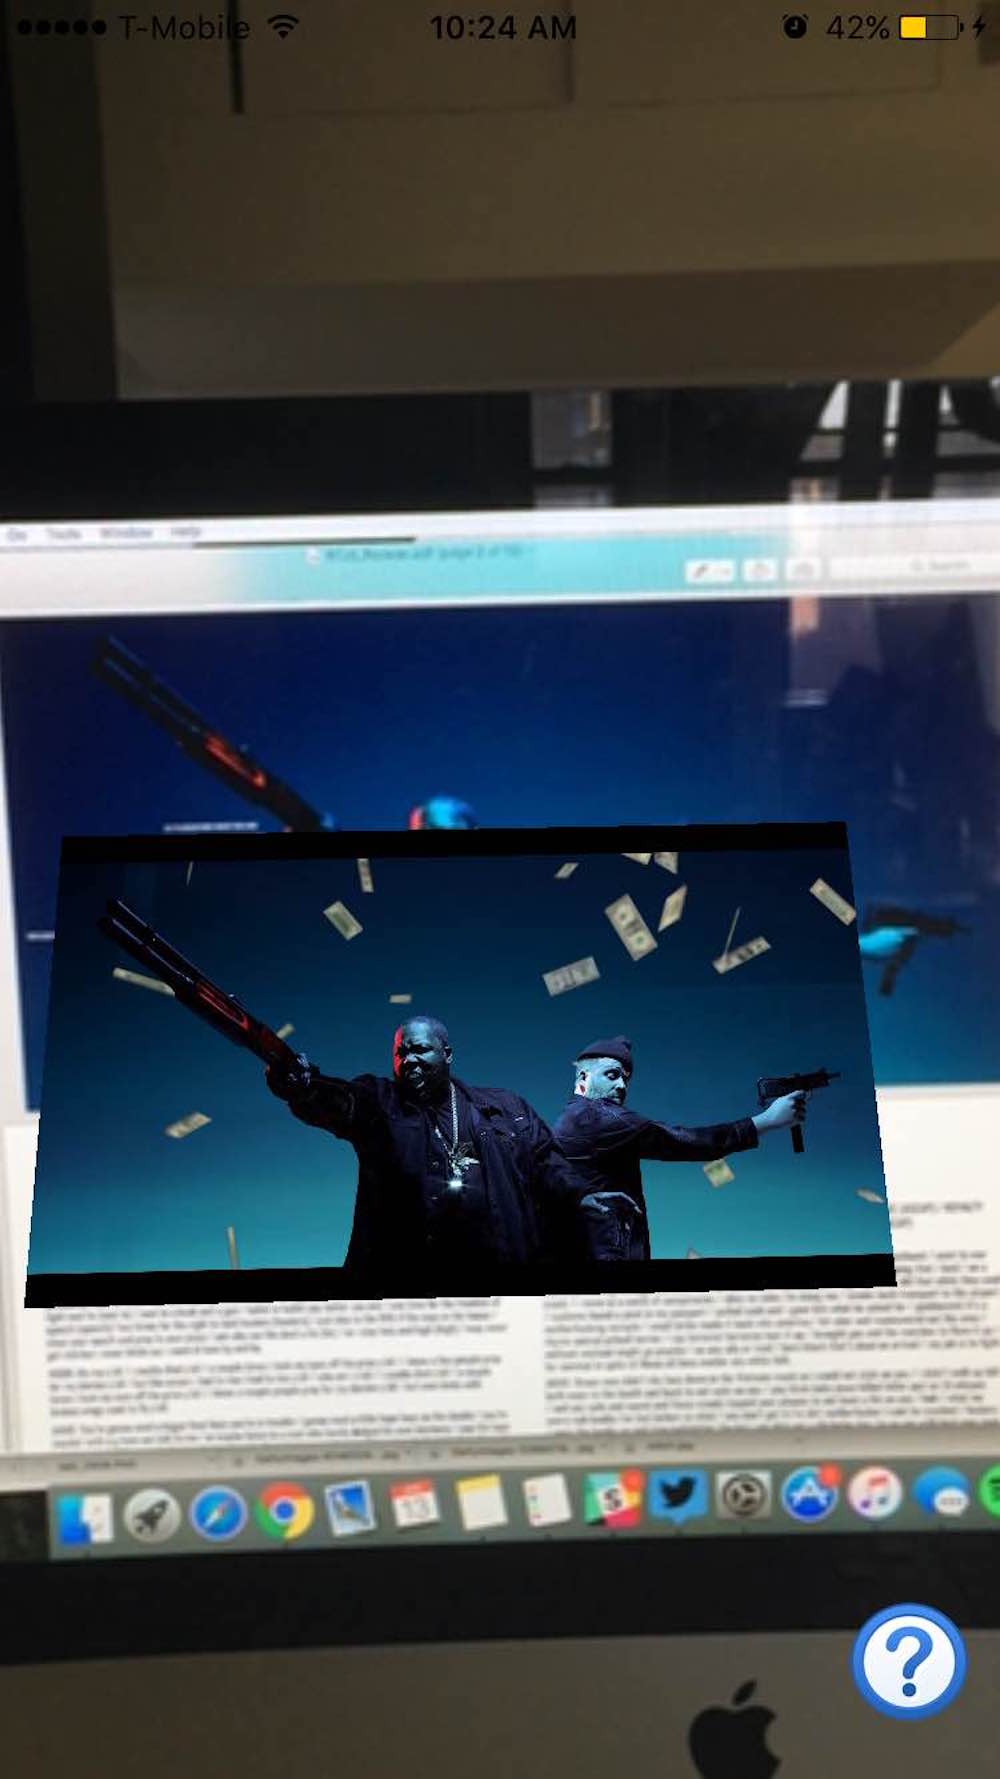 The Run the Jewels Augmented Reality App ARTJ Is Out Now